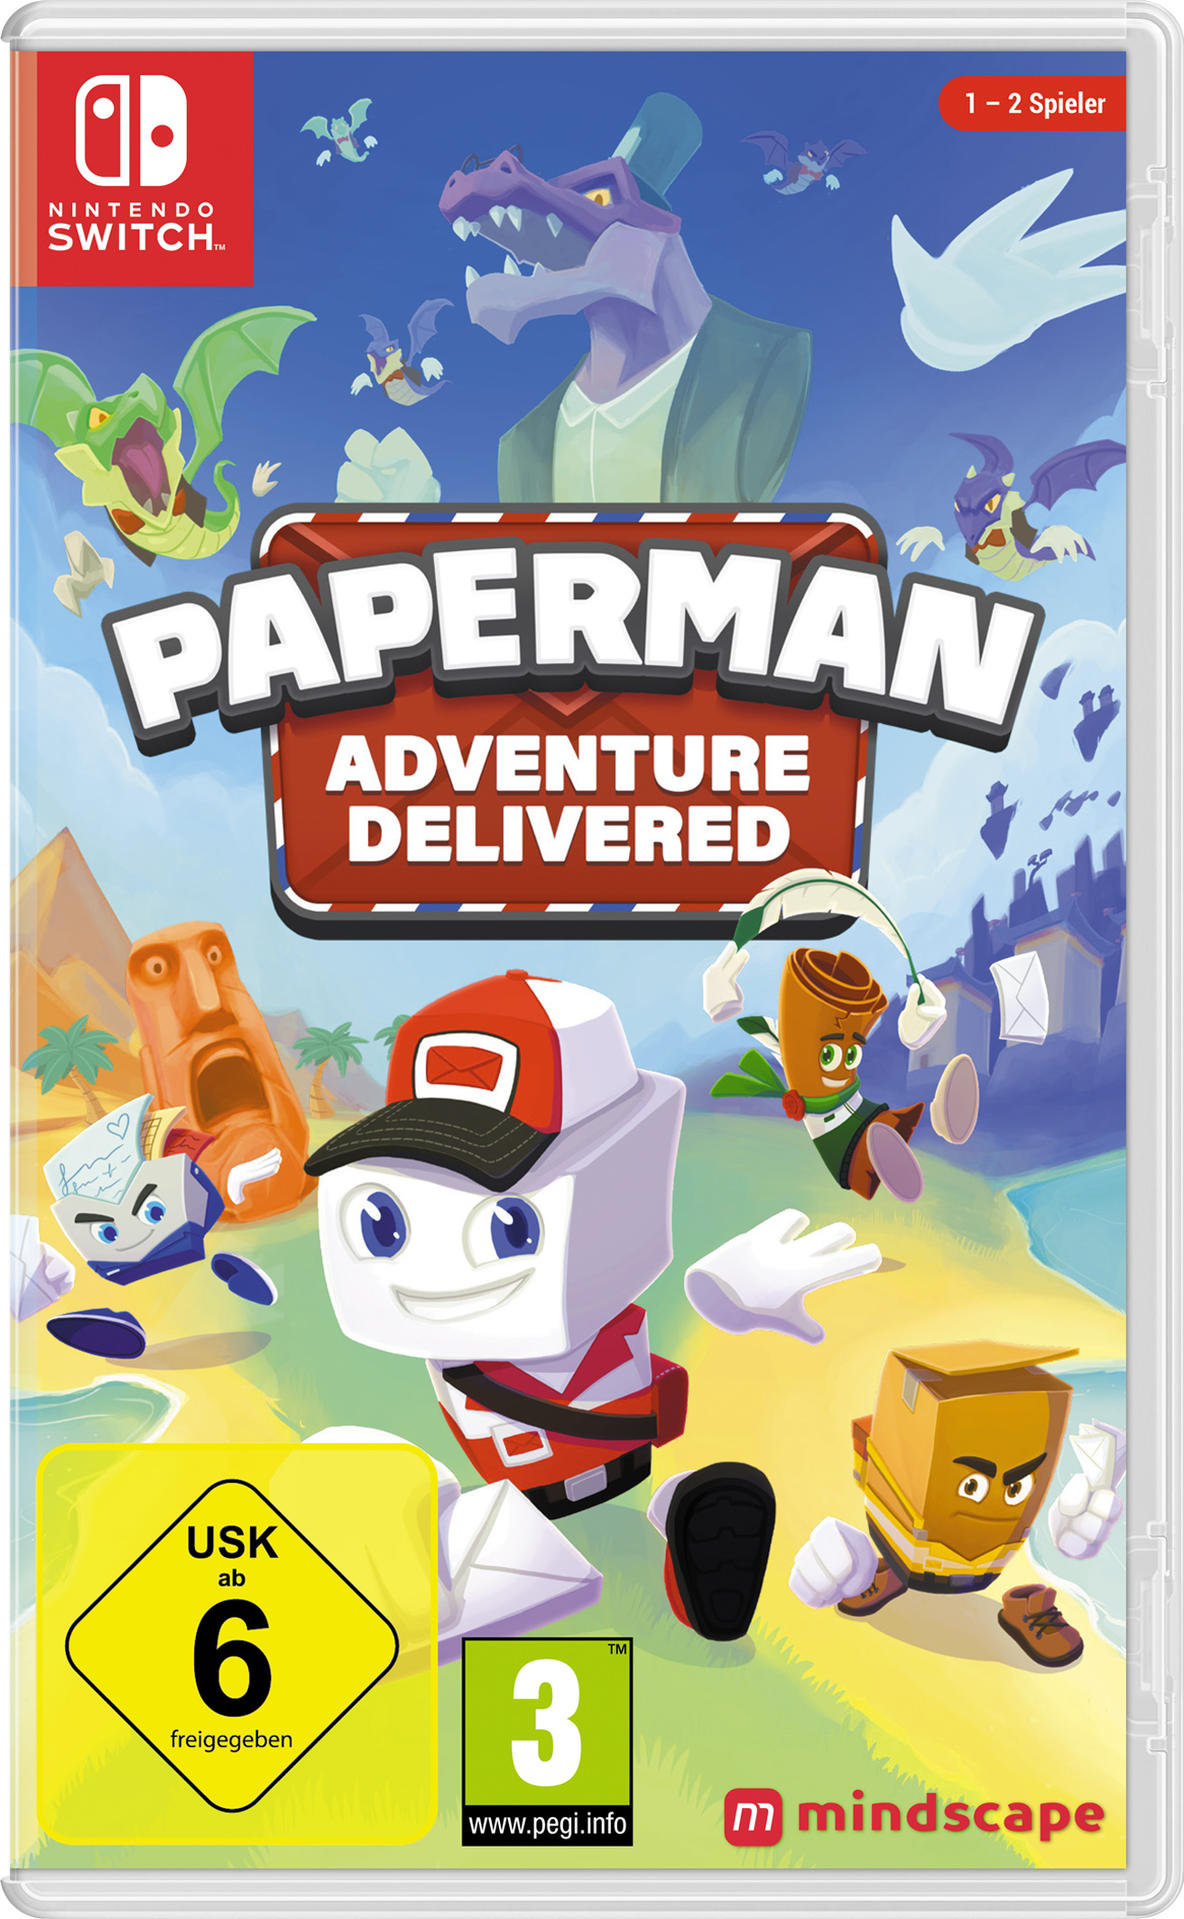 Delivered [Nintendo Adventure - Paperman: Switch]